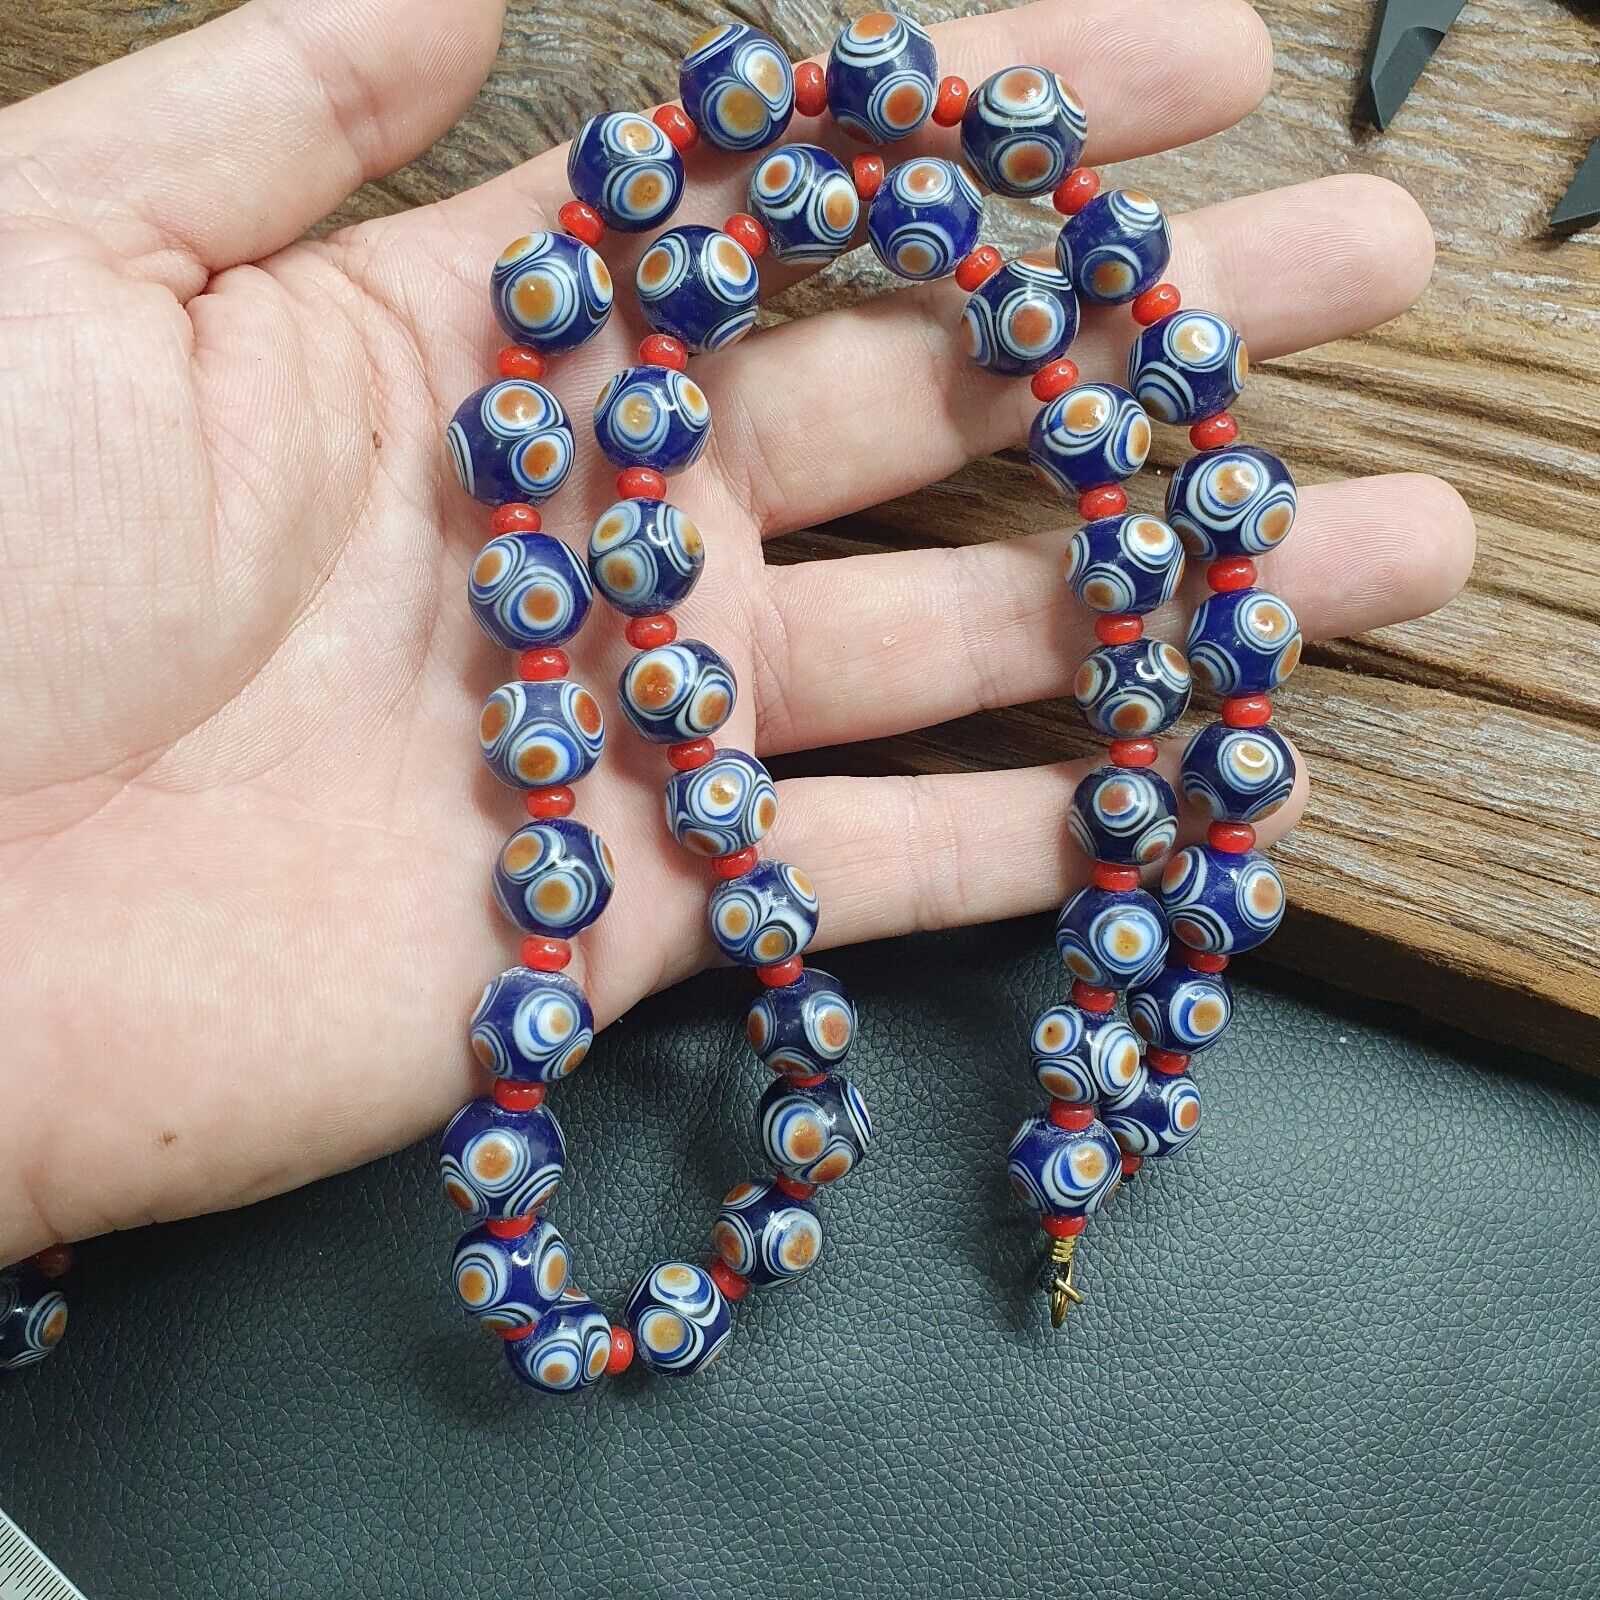 Amazing Hundred Eyes beads with venetian Red Whiteheart beads Necklace